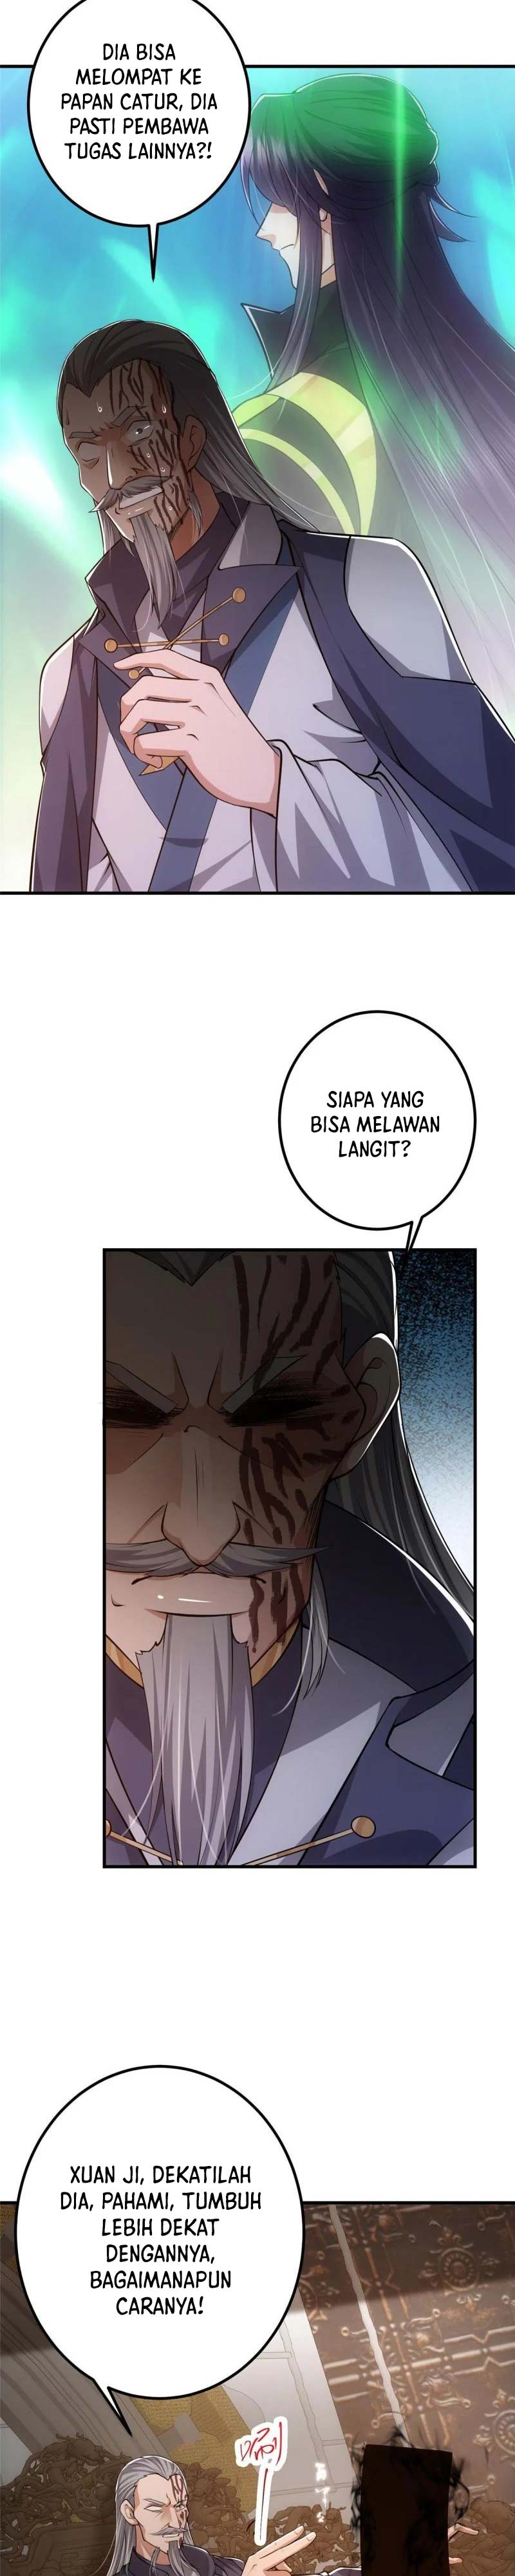 Keep A Low Profile, Sect Leader Chapter 122 Bahasa Indonesia